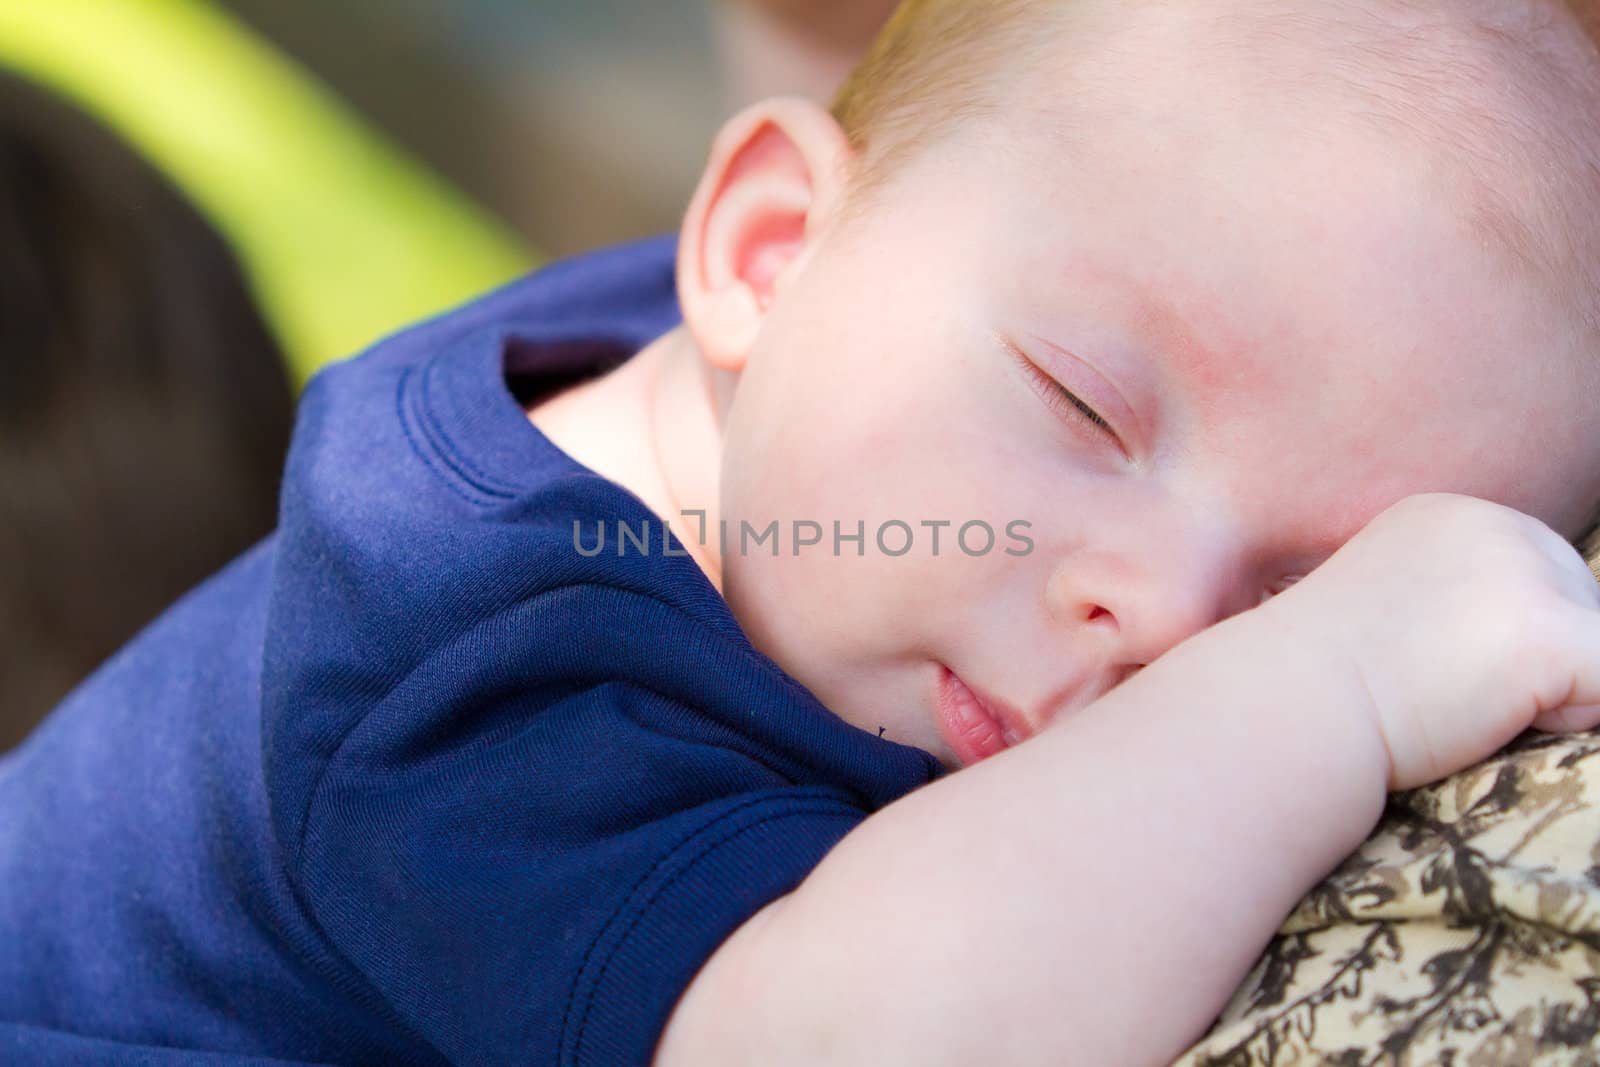 A baby that is asleep wearing a blue shirt resting.